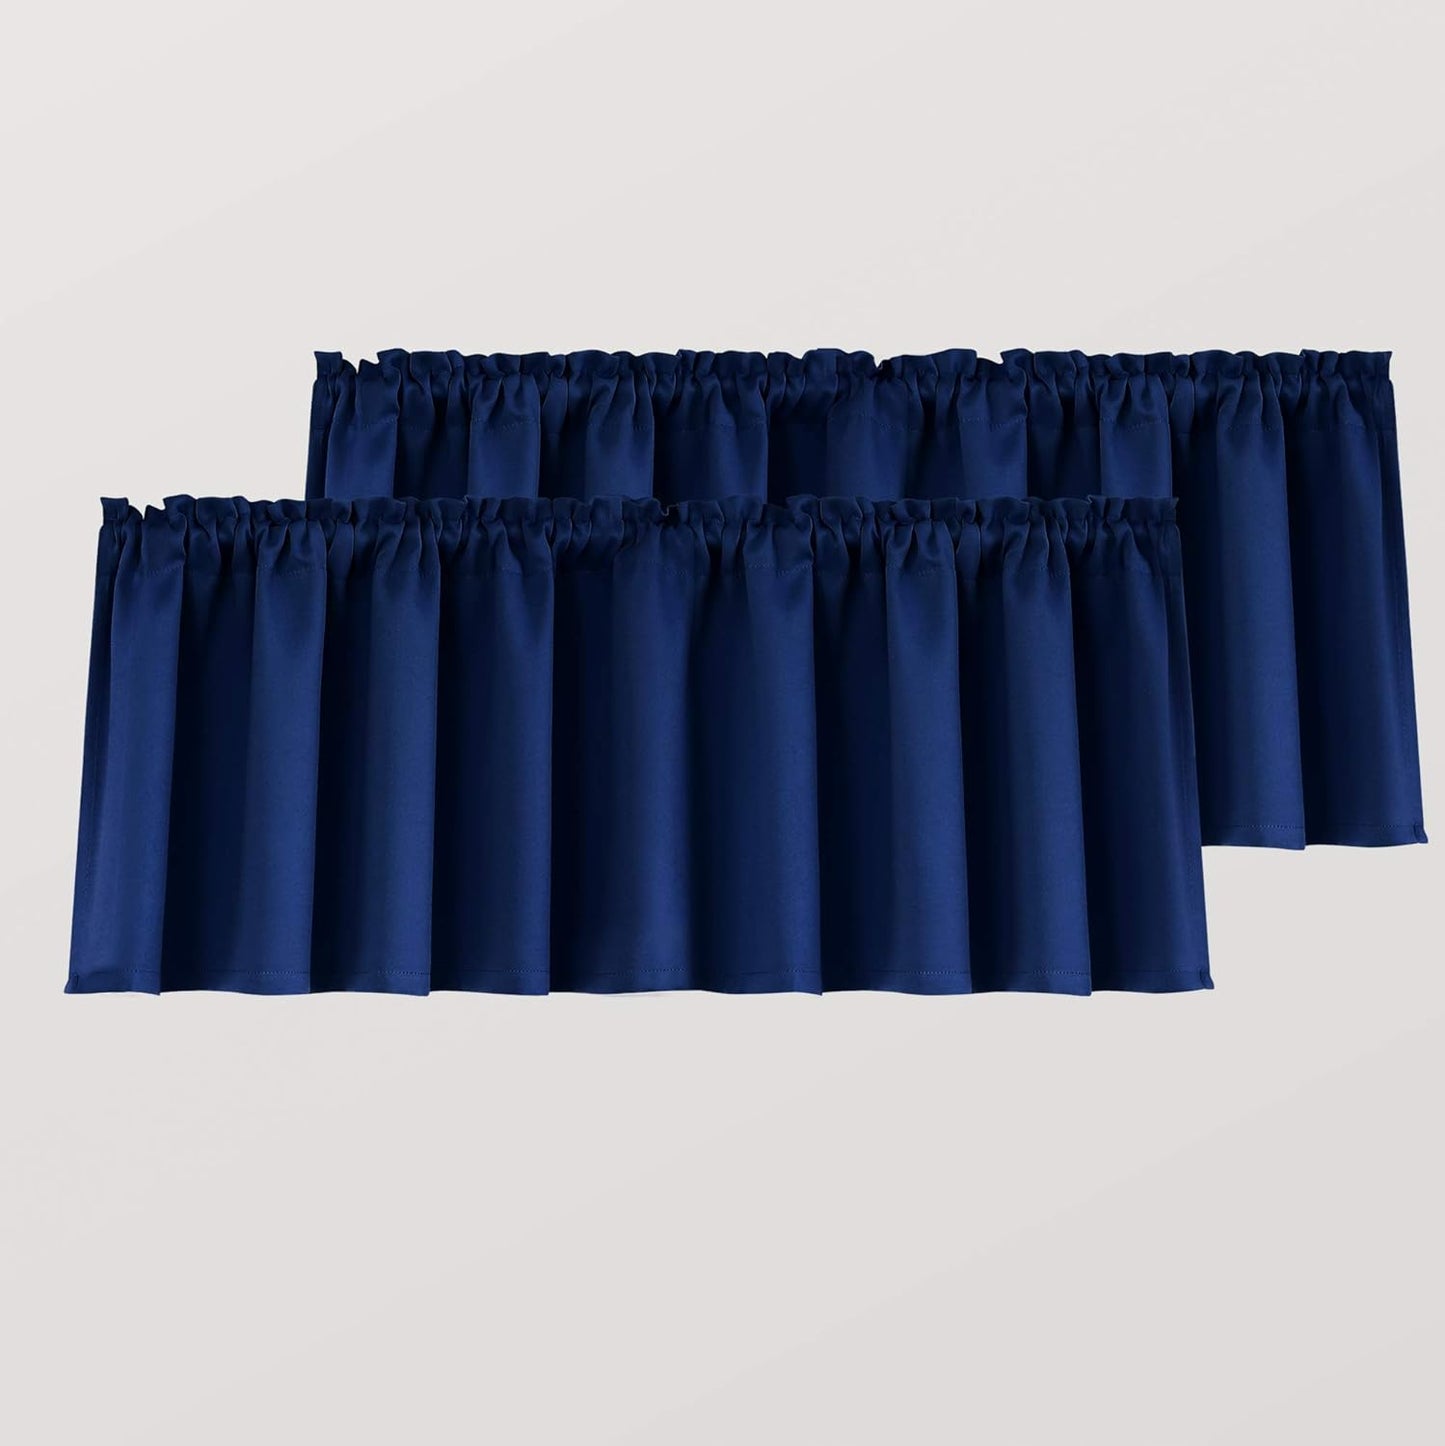 Mrs.Naturall Beige Valance Curtains for Windows 36X16 Inch Length  MRS.NATURALL TEXTILE Navy Blue 52X18 